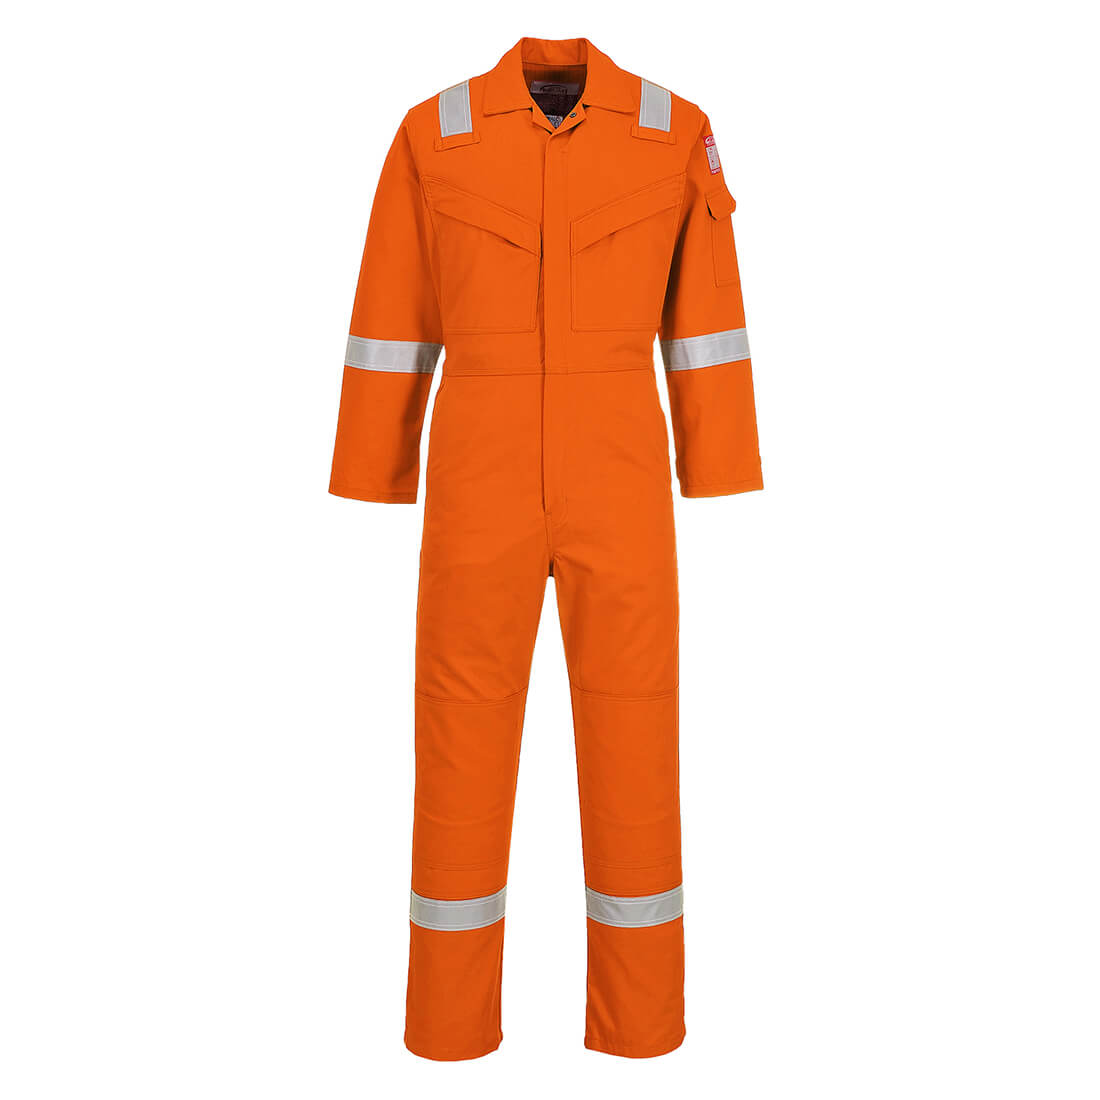 Image of Biz Flame Mens Aberdeen Flame Resistant Antistatic Coverall Orange XL 32"